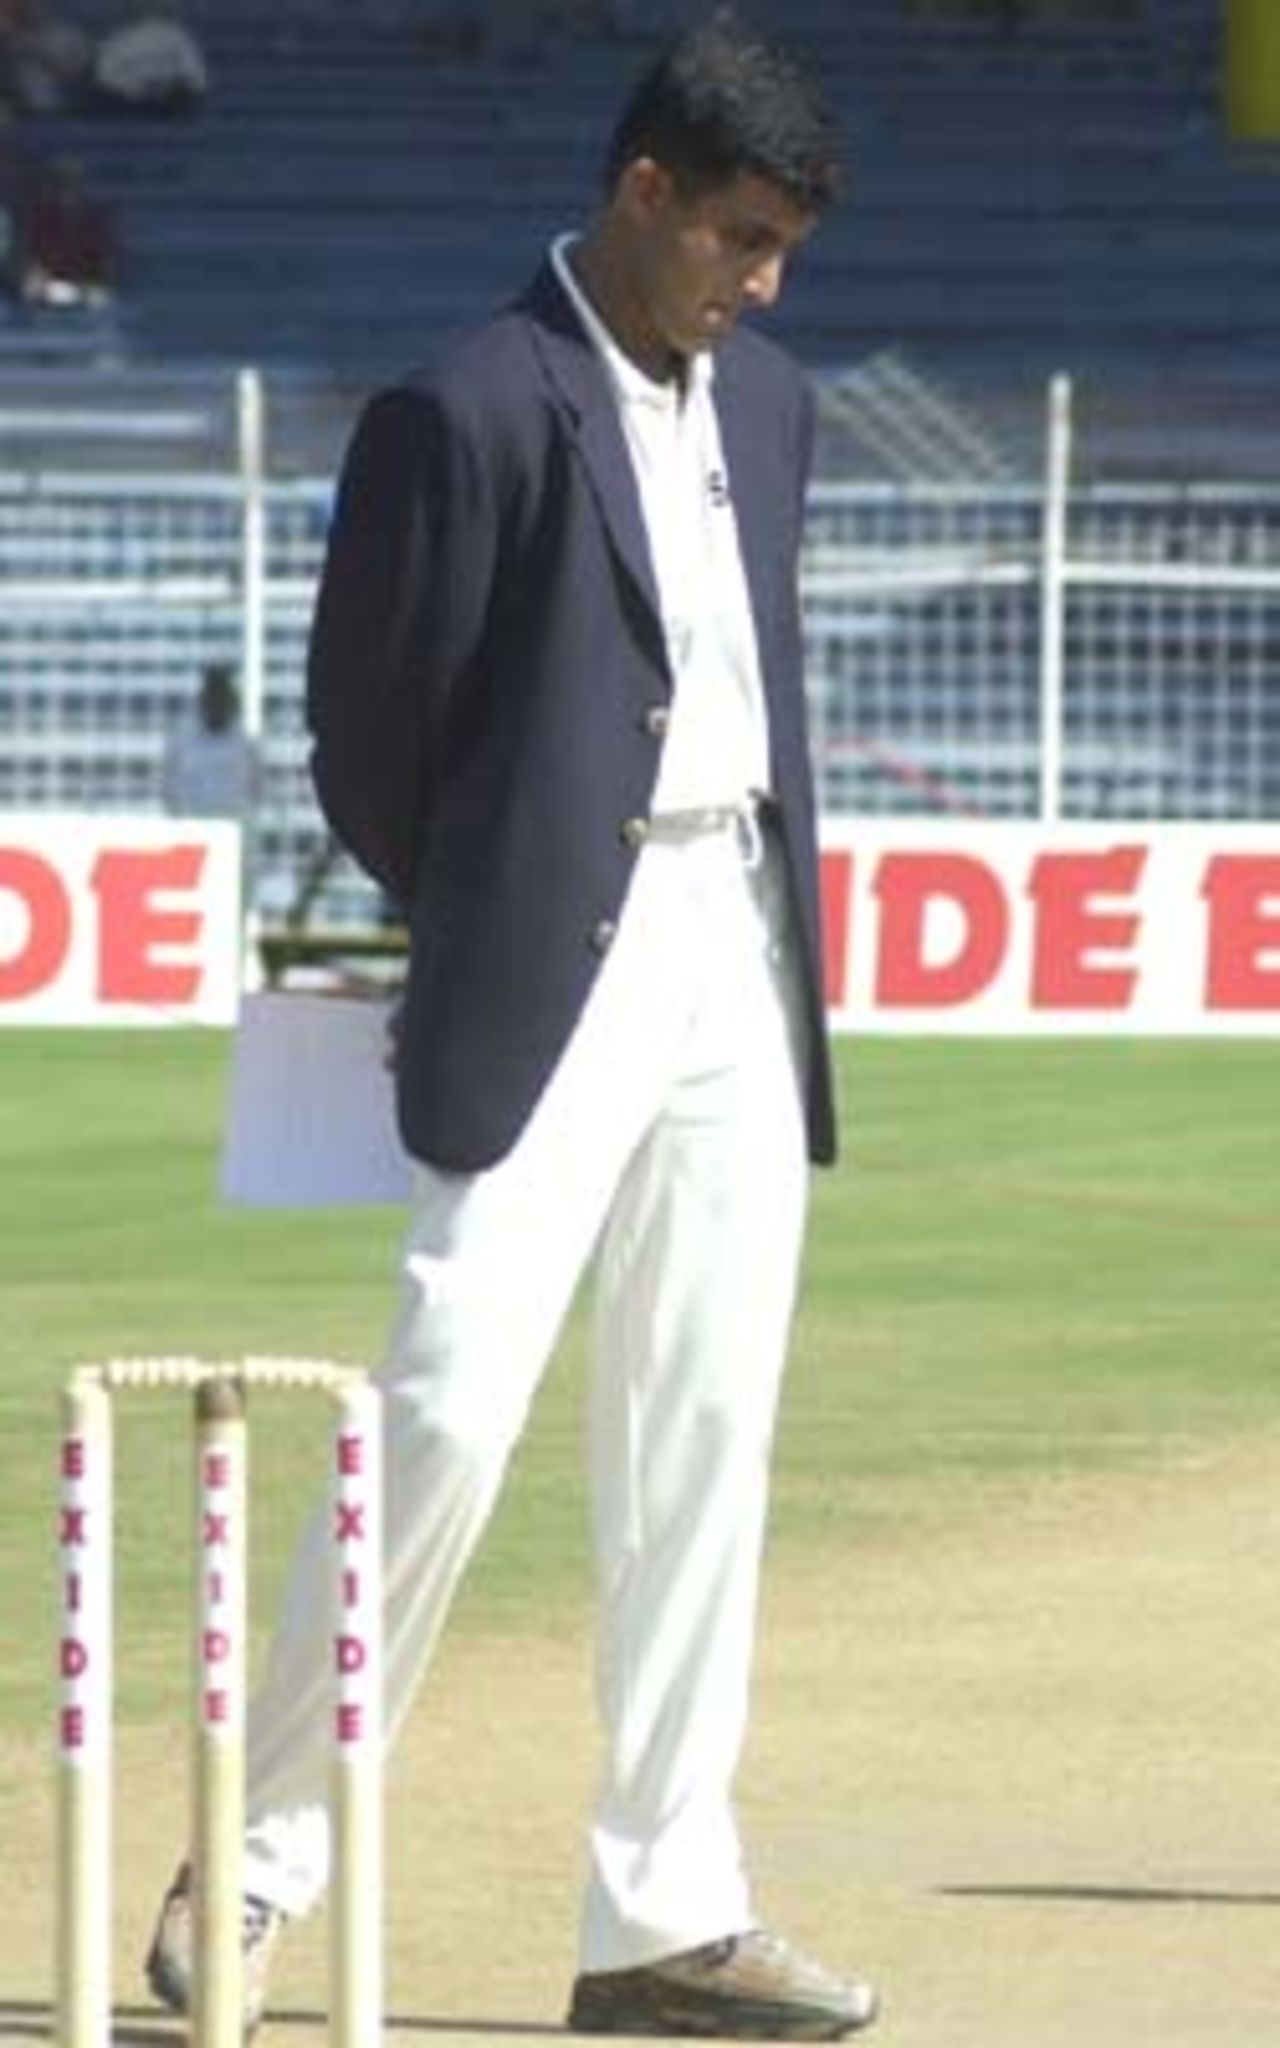 2nd Test: India v West Indies at Chennai, 17-21 October 2002